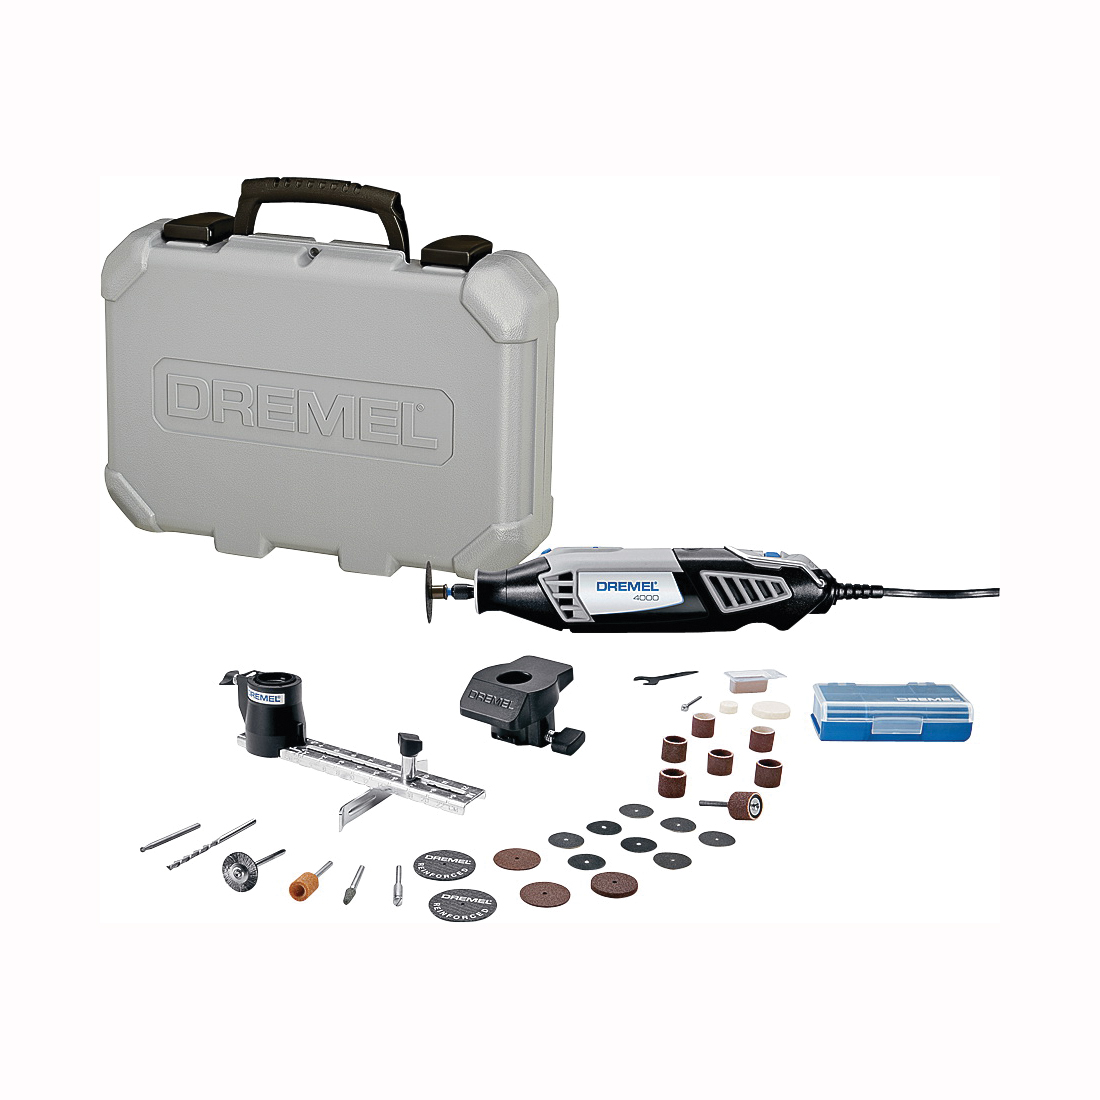 4000-2/30 Rotary Tool Kit, 1.6 A, 1/32 to 1/8 in Chuck, Keyed Chuck, 5000 to 35,000 rpm Speed